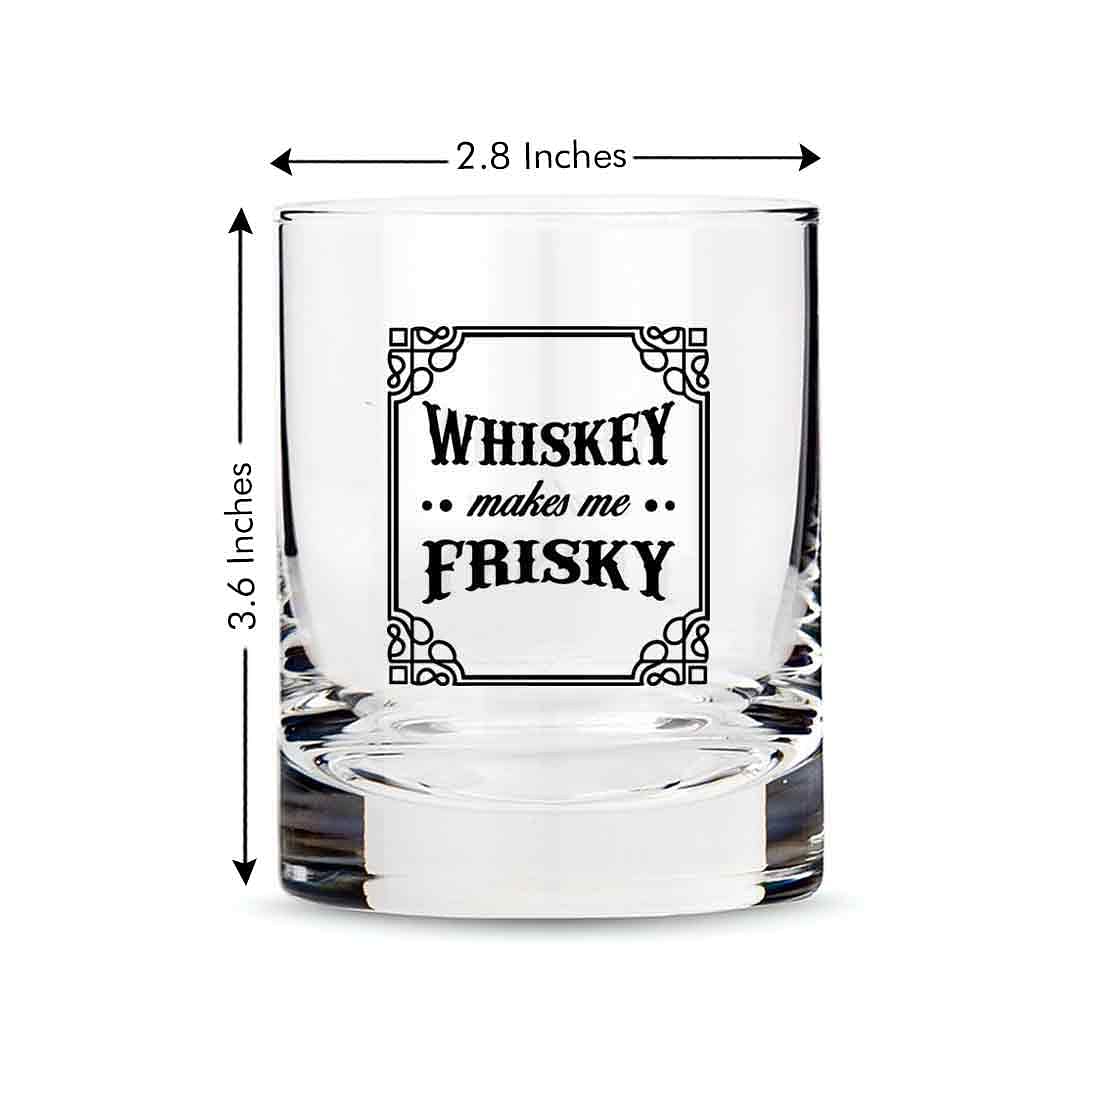 Whiskey Glasses Liquor Glass-  Anniversary Birthday Gift Funny Gifts for Husband Bf - WHISKY MAKES ME FRISKY Nutcase